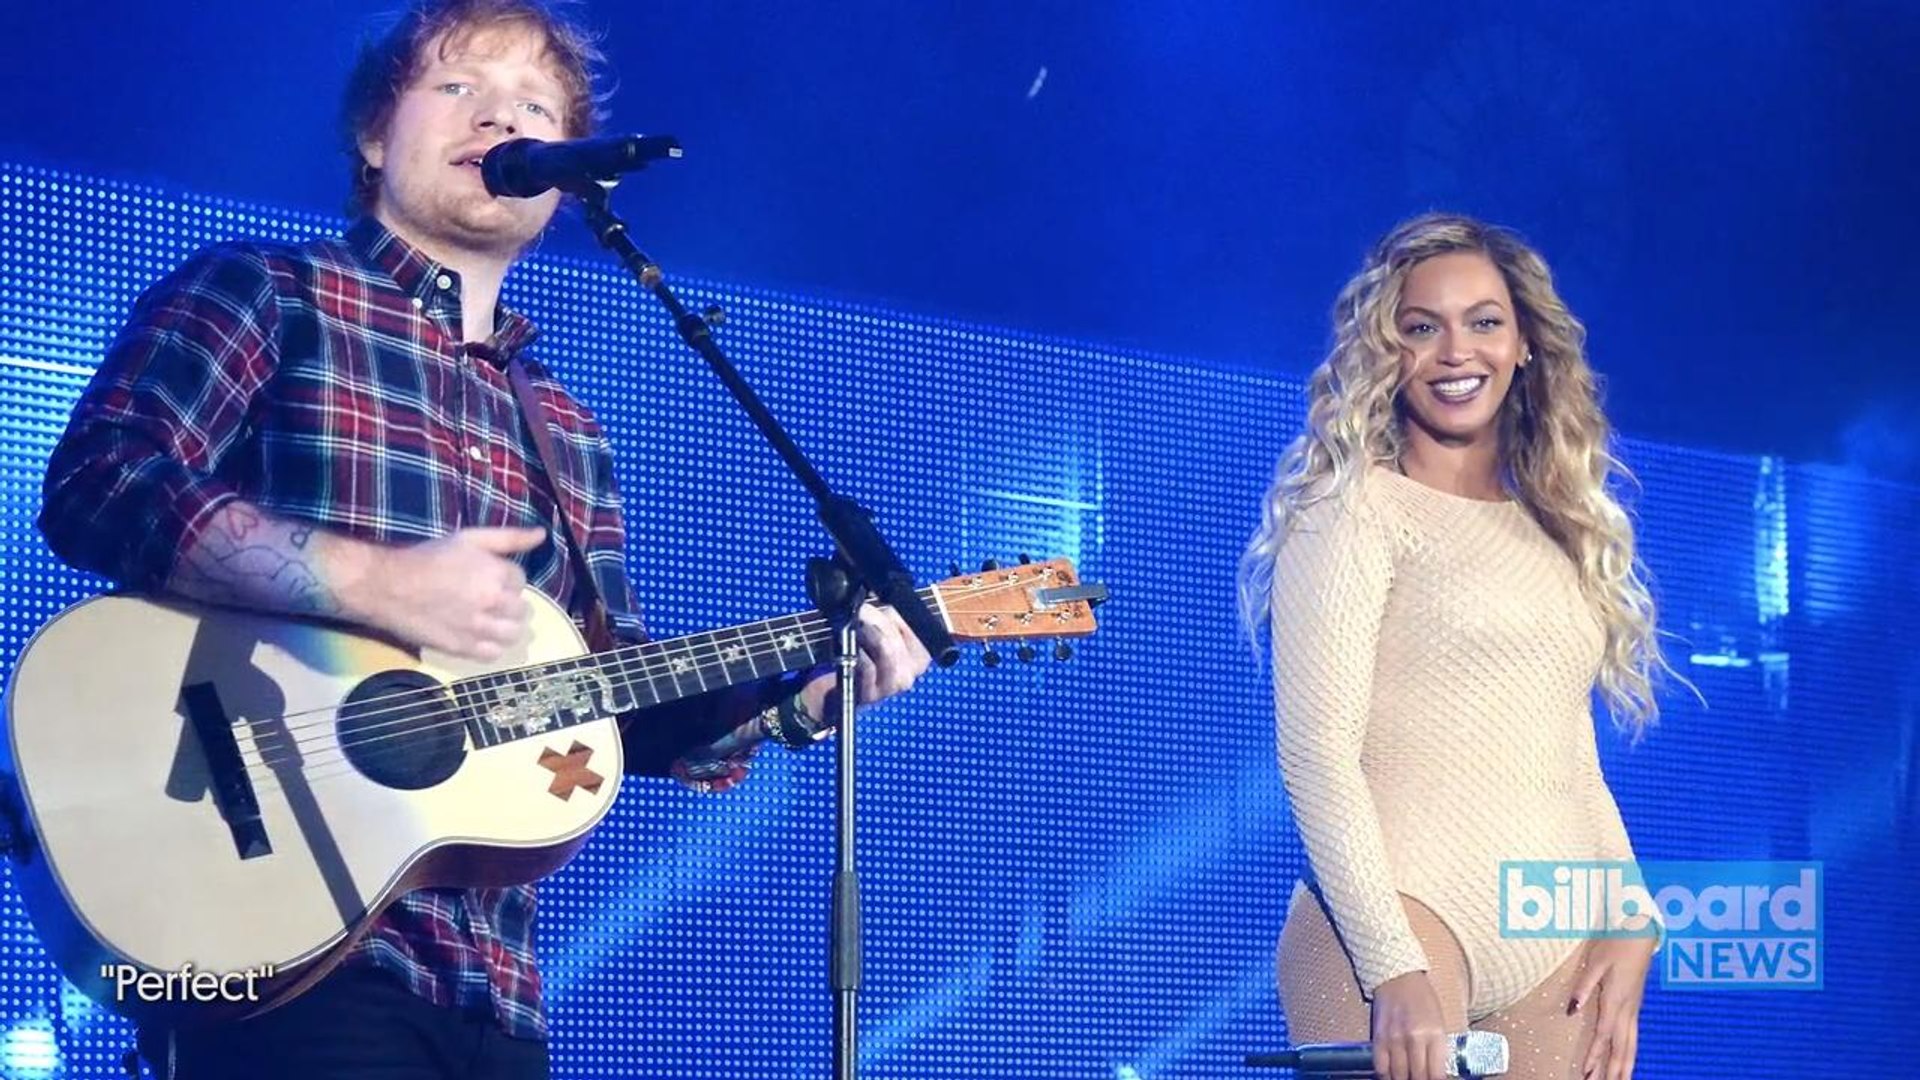 Ed Sheeran & Beyonce's 'Perfect' On Track to Hit No. 1 on Billboard Hot 100 | Bil